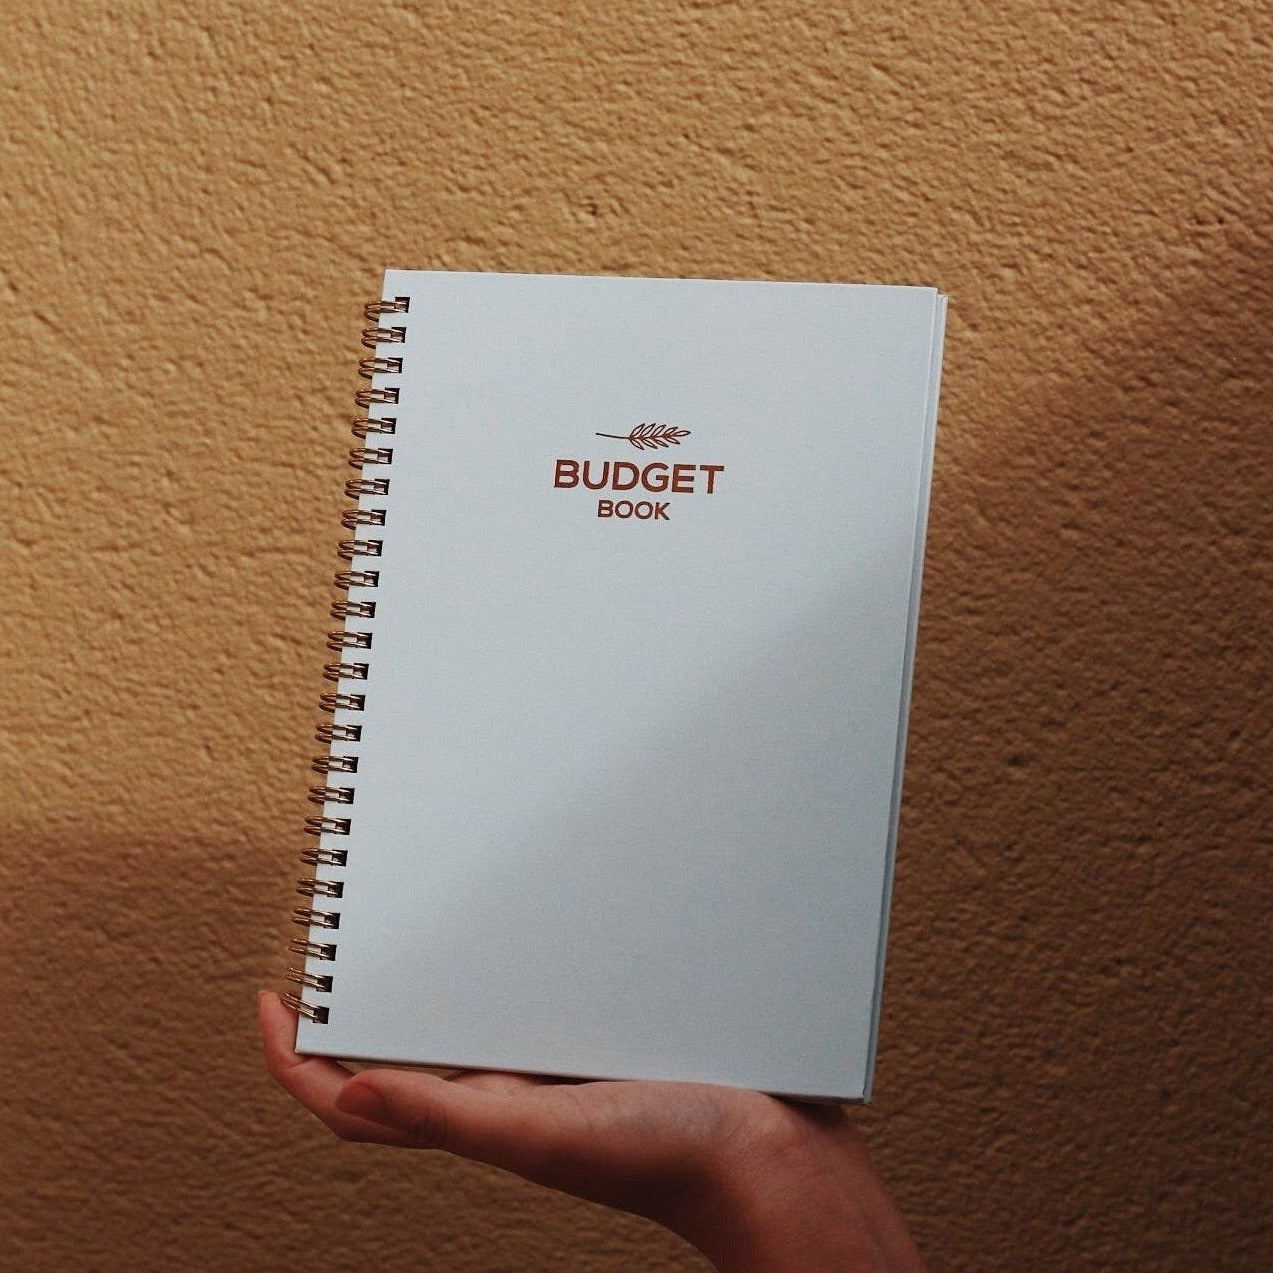 The Budget Book - Financial Planner